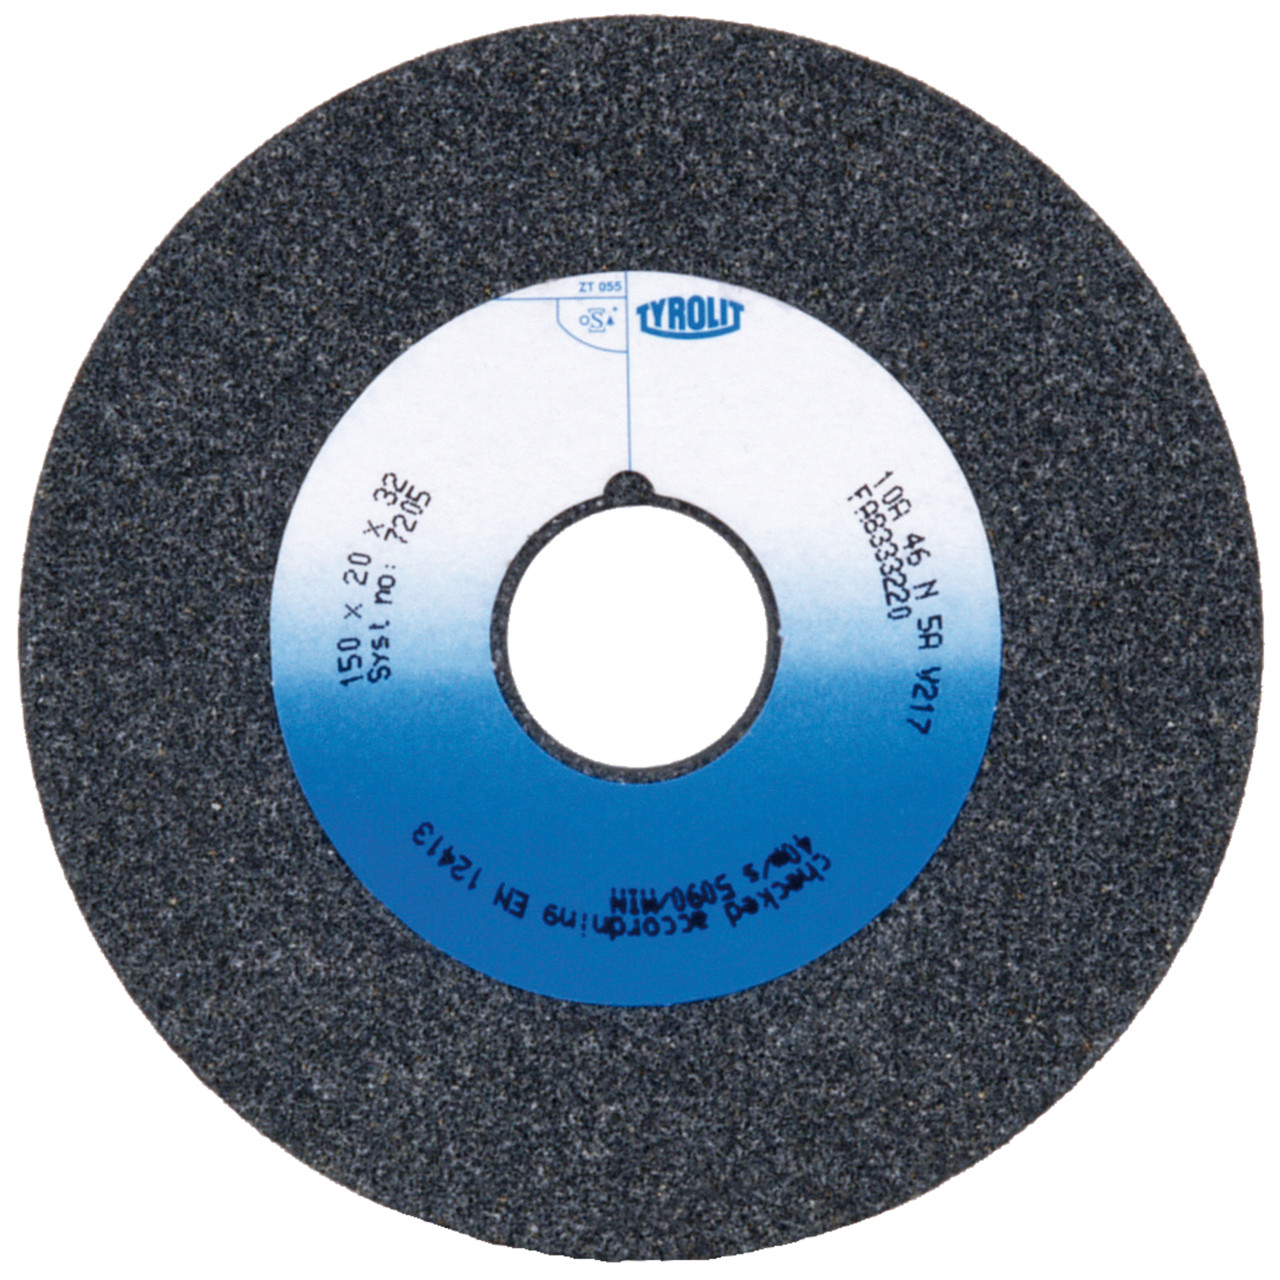 TYROLIT conventional ceramic grinding wheels DxDxH 250x32x40 For unalloyed and low-alloy steels, shape: 1, Art. 34046765